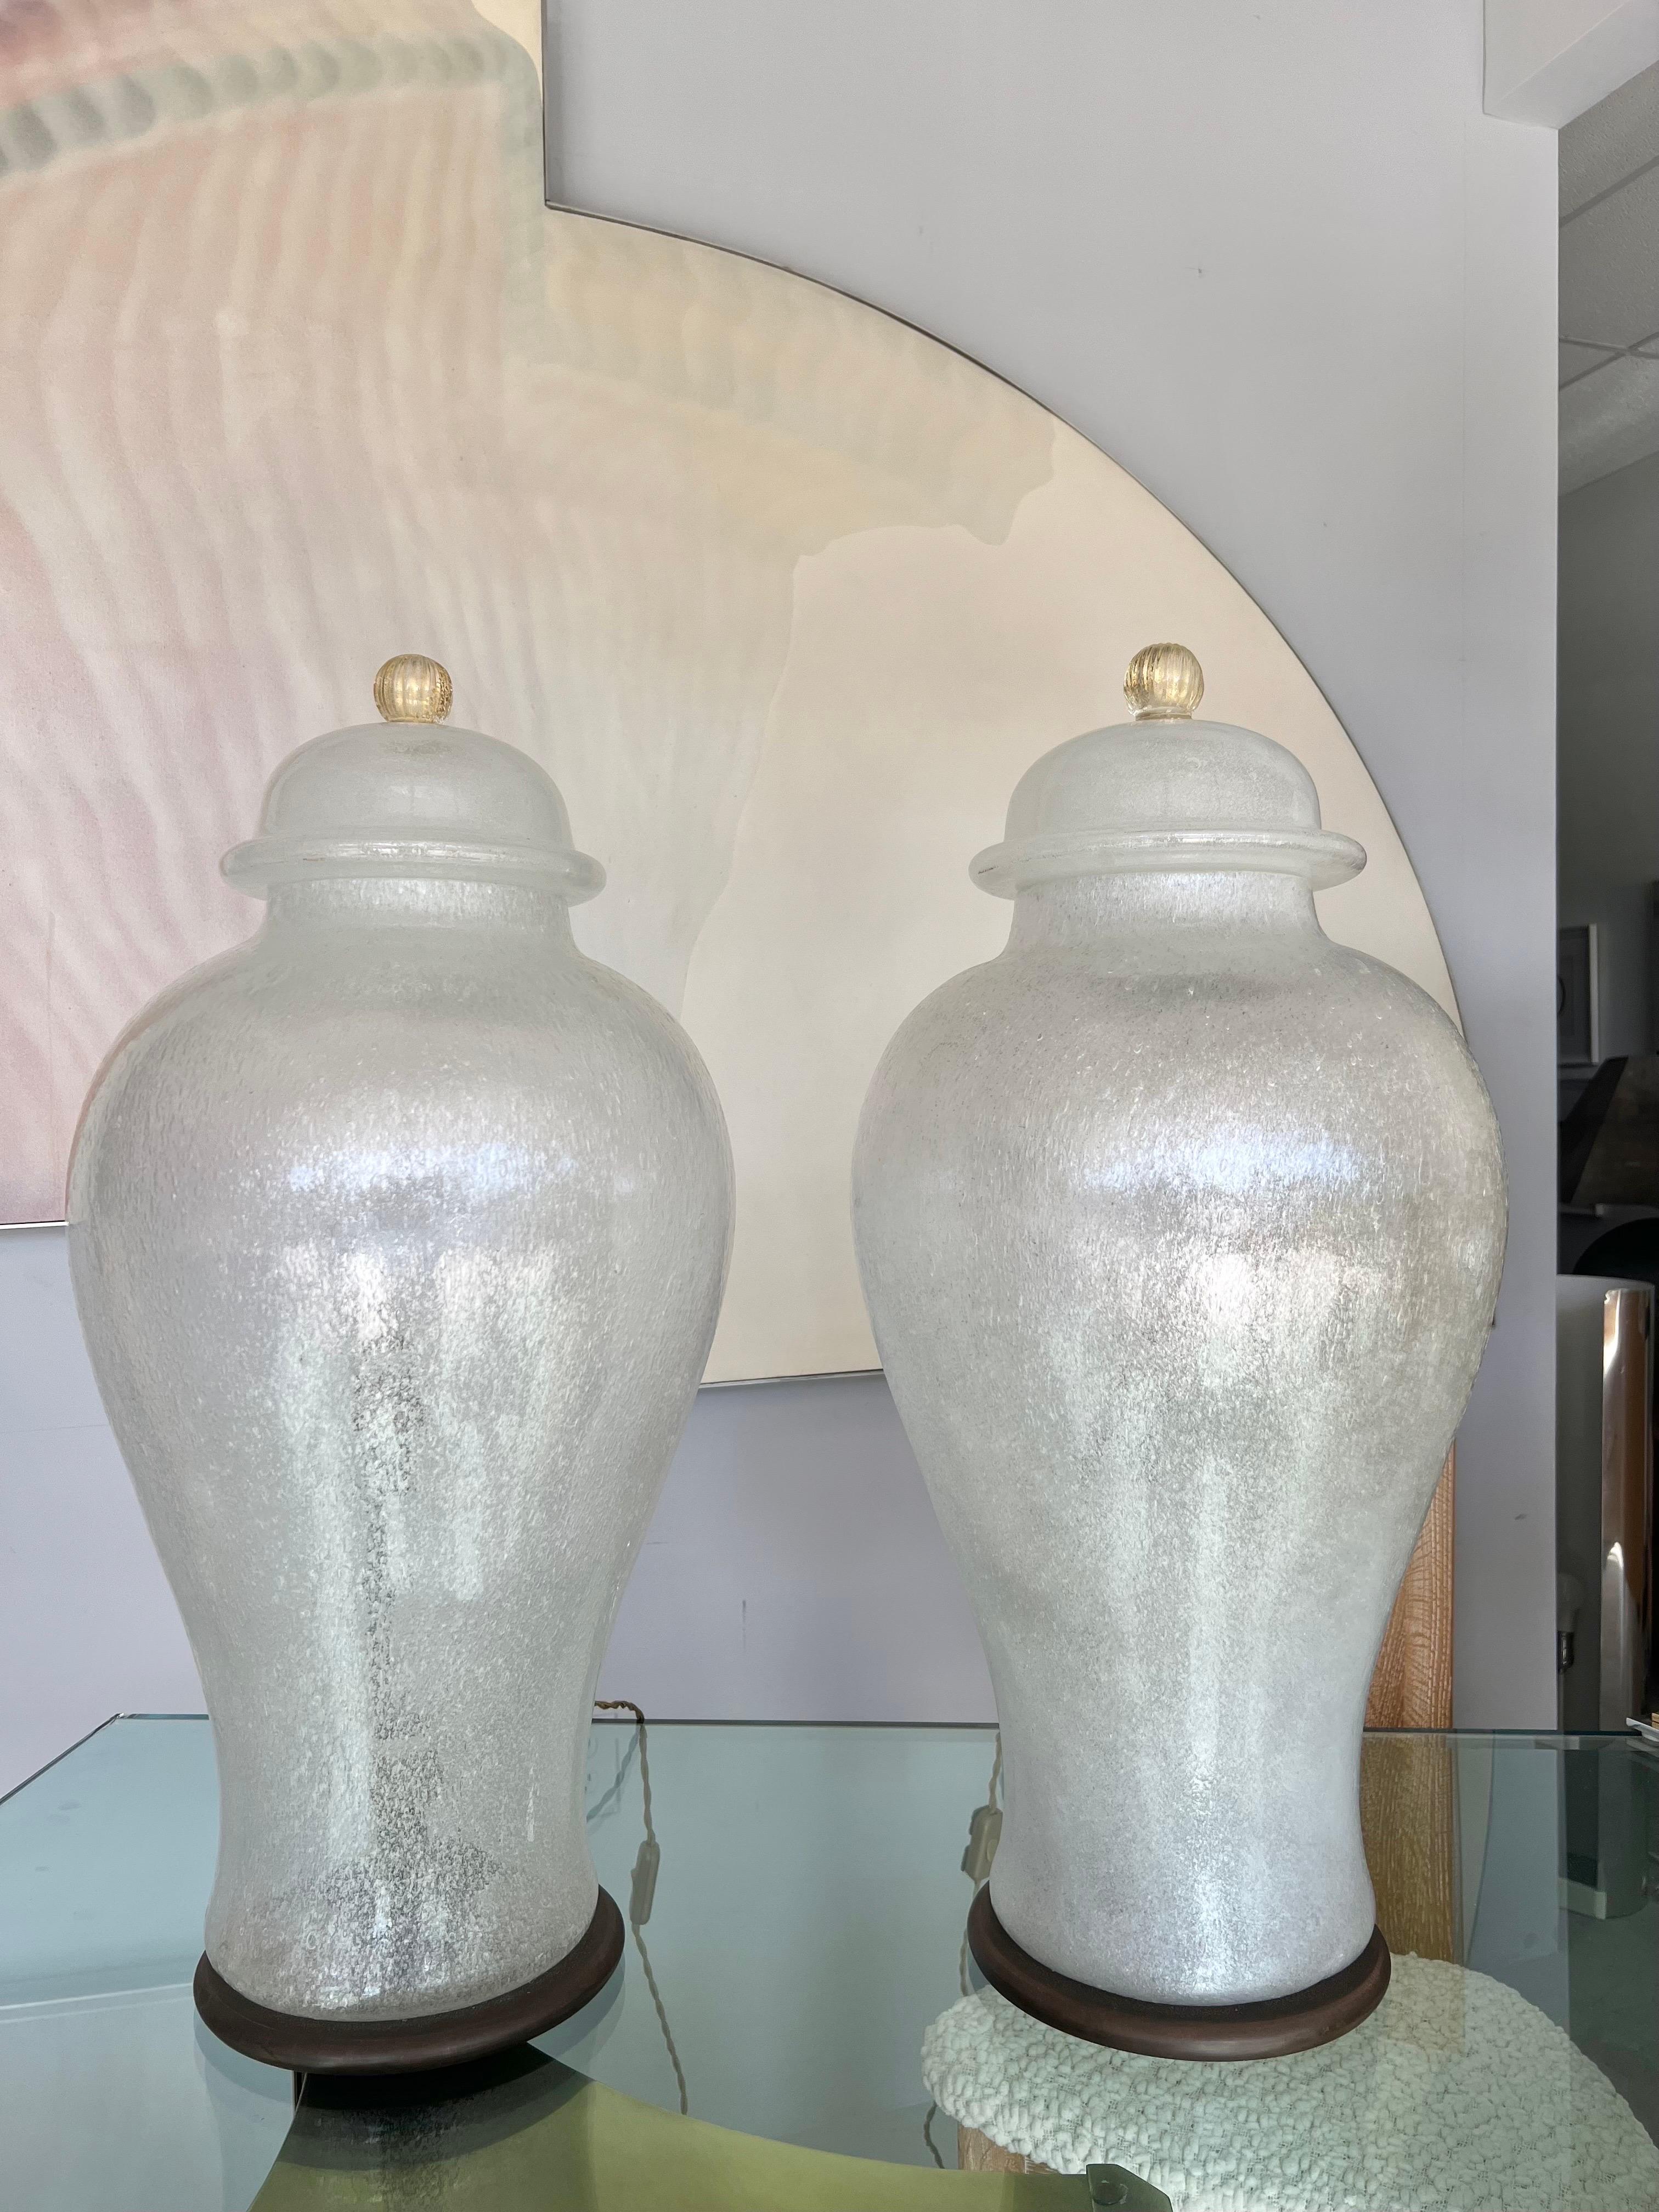 Monumental pair of lighted urns in pulegoso art glass by Seguso. The tops are removable exposing bronze fittings for 2 bulbs each. Round bronze bases, silk twist cords. Signed on the metal inside.